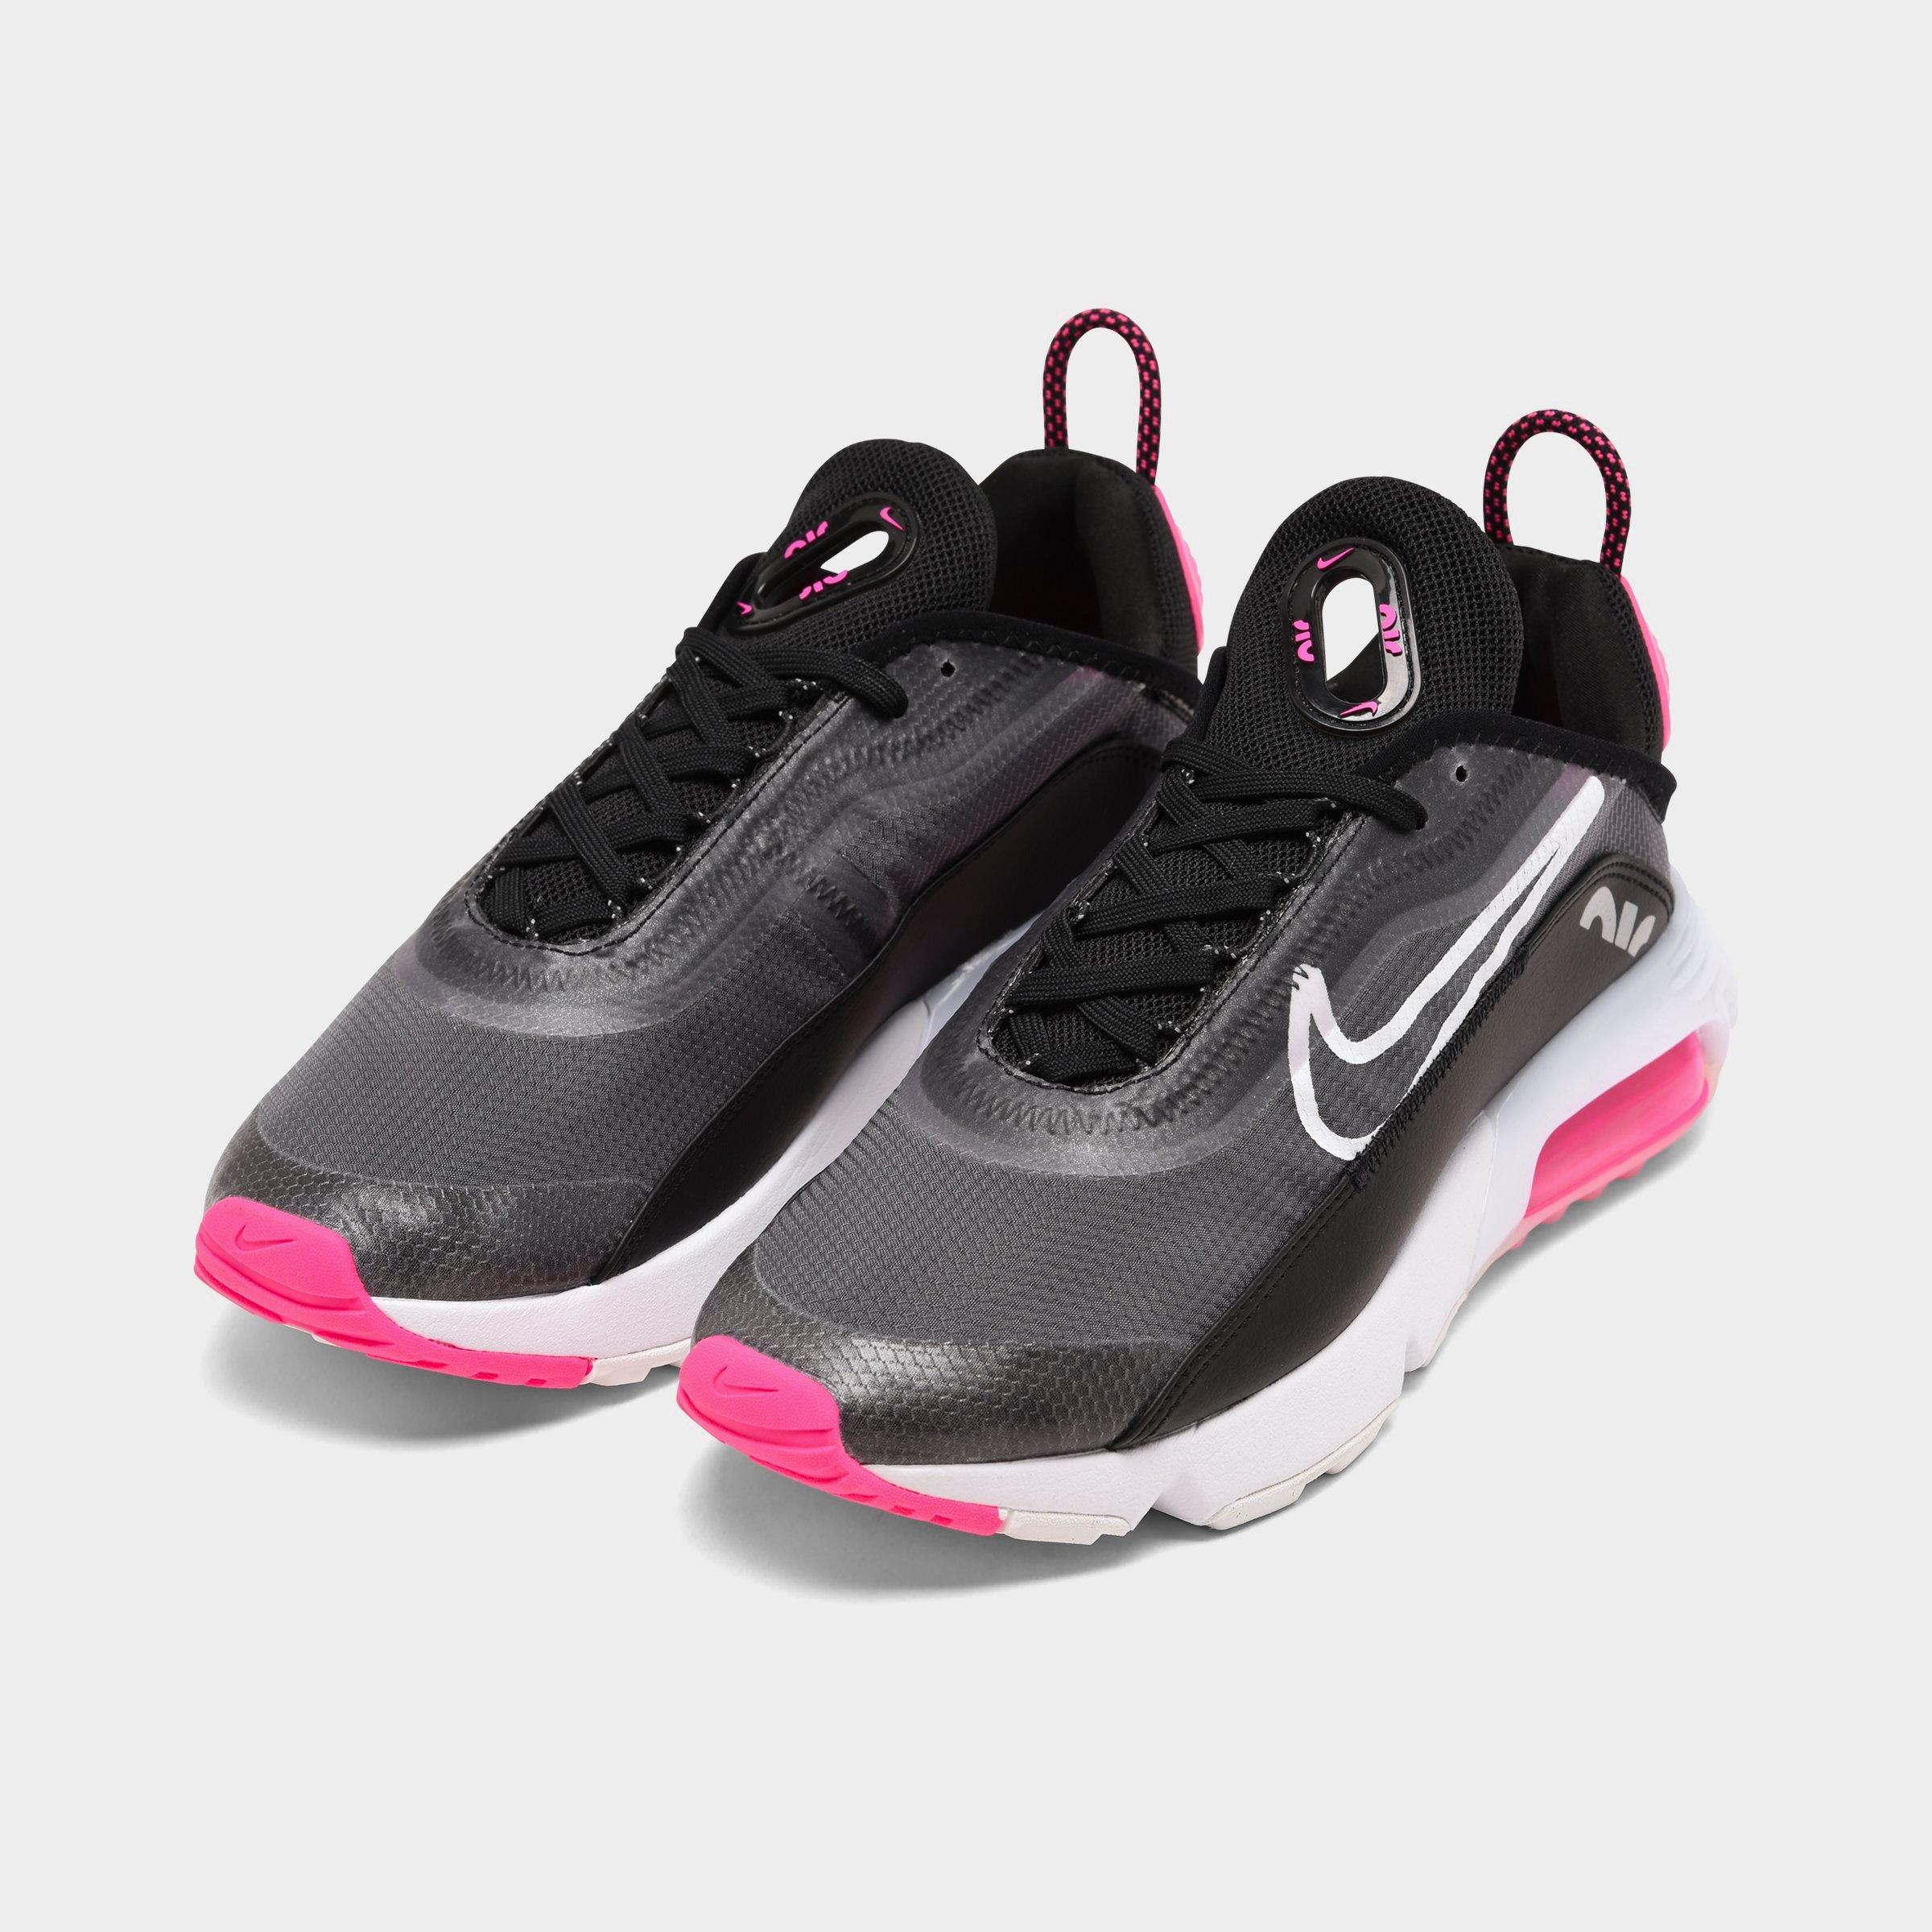 nike 2090 black and pink